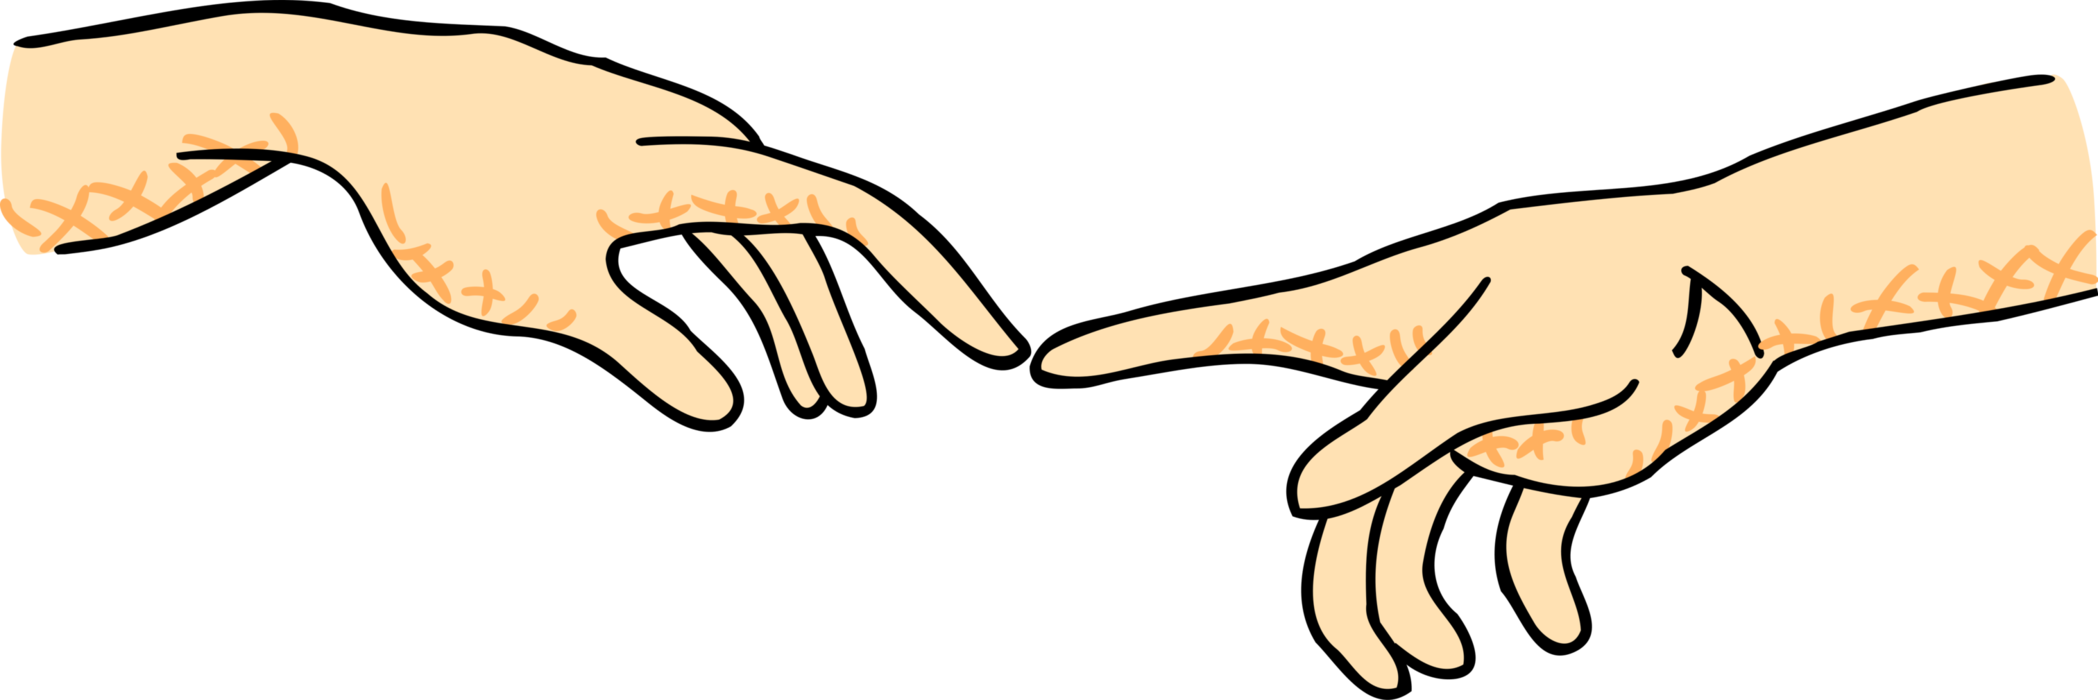 Vector Illustration of Hand of God, Michelangelo's the Creation of Adam Fresco Painting in Sistine Chapel, Rome, Italy